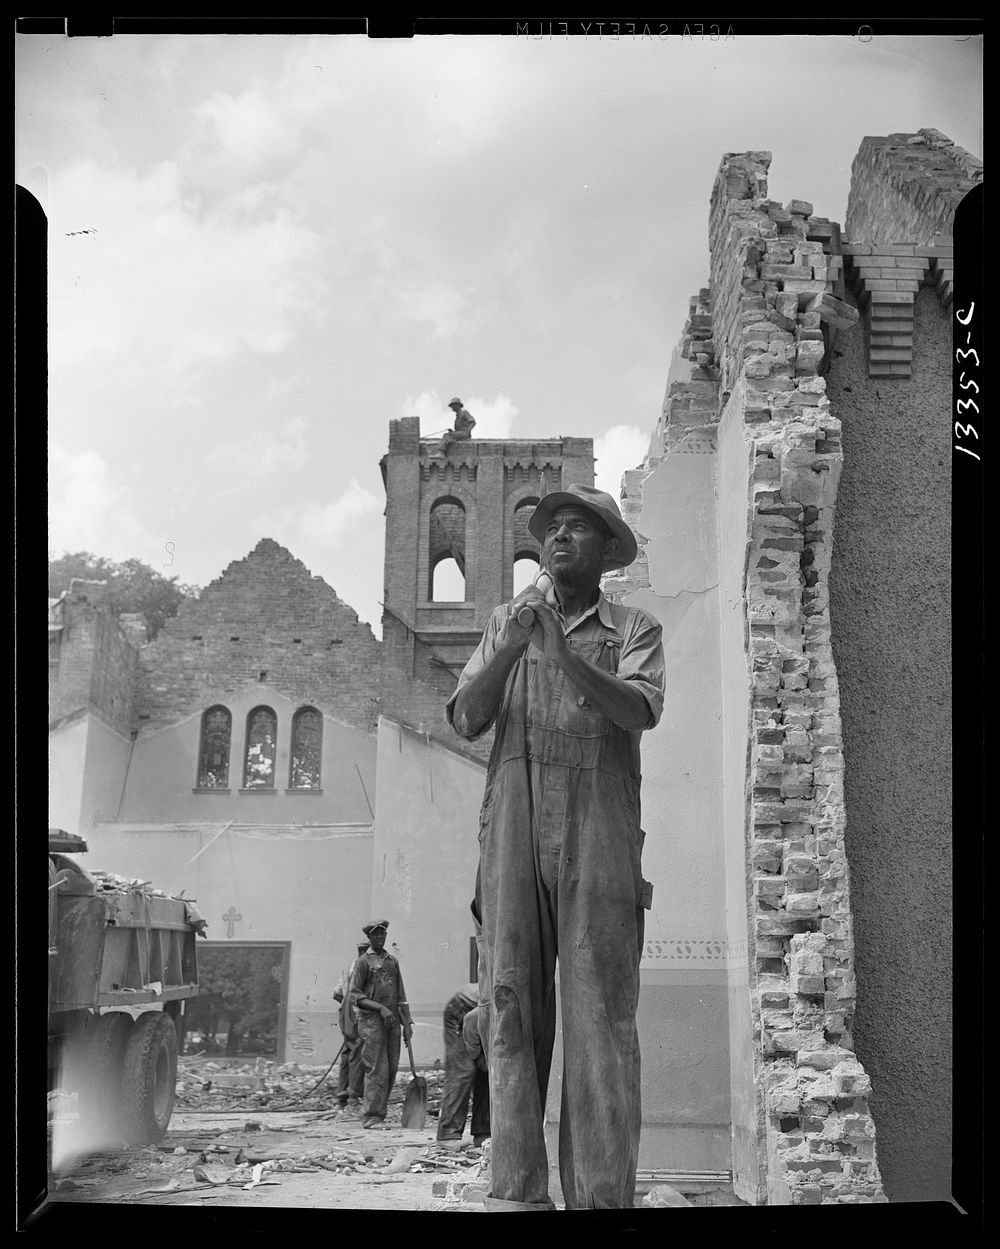 Washington, D.C. Construction workman wrecking a church on Independence Avenue. Sourced from the Library of Congress.